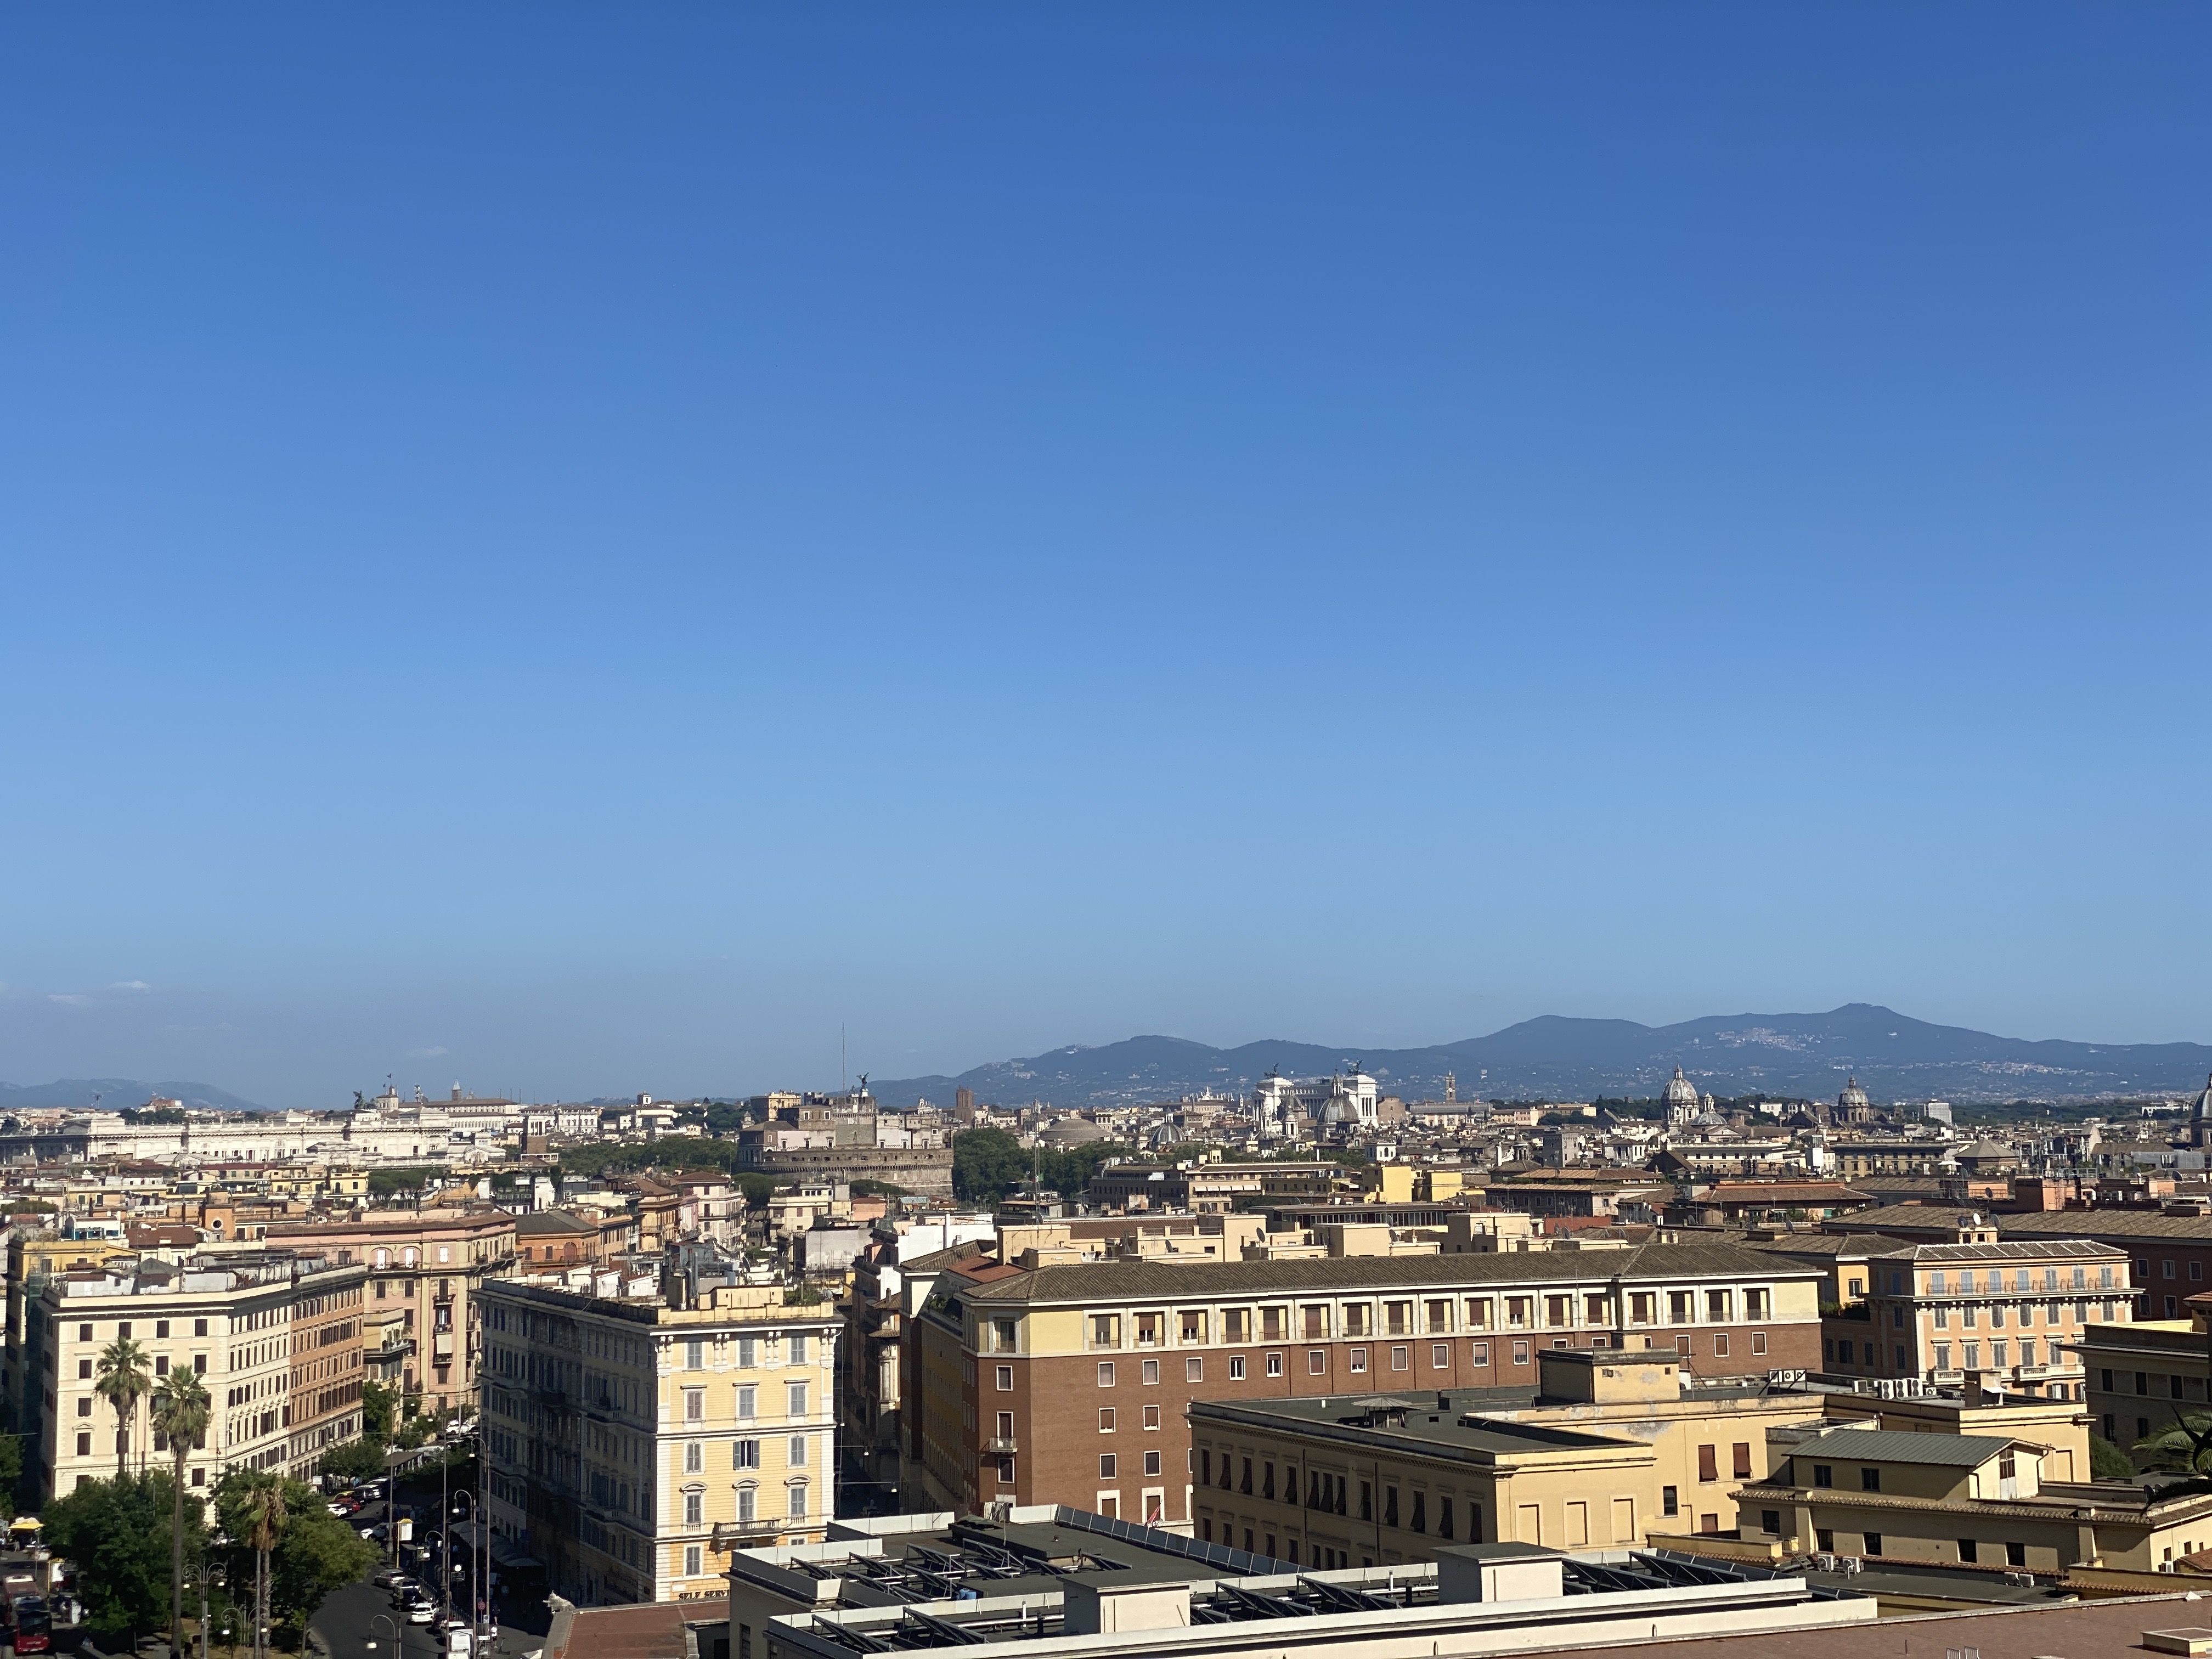 Header image: skyline of Rome from the Vatican museums